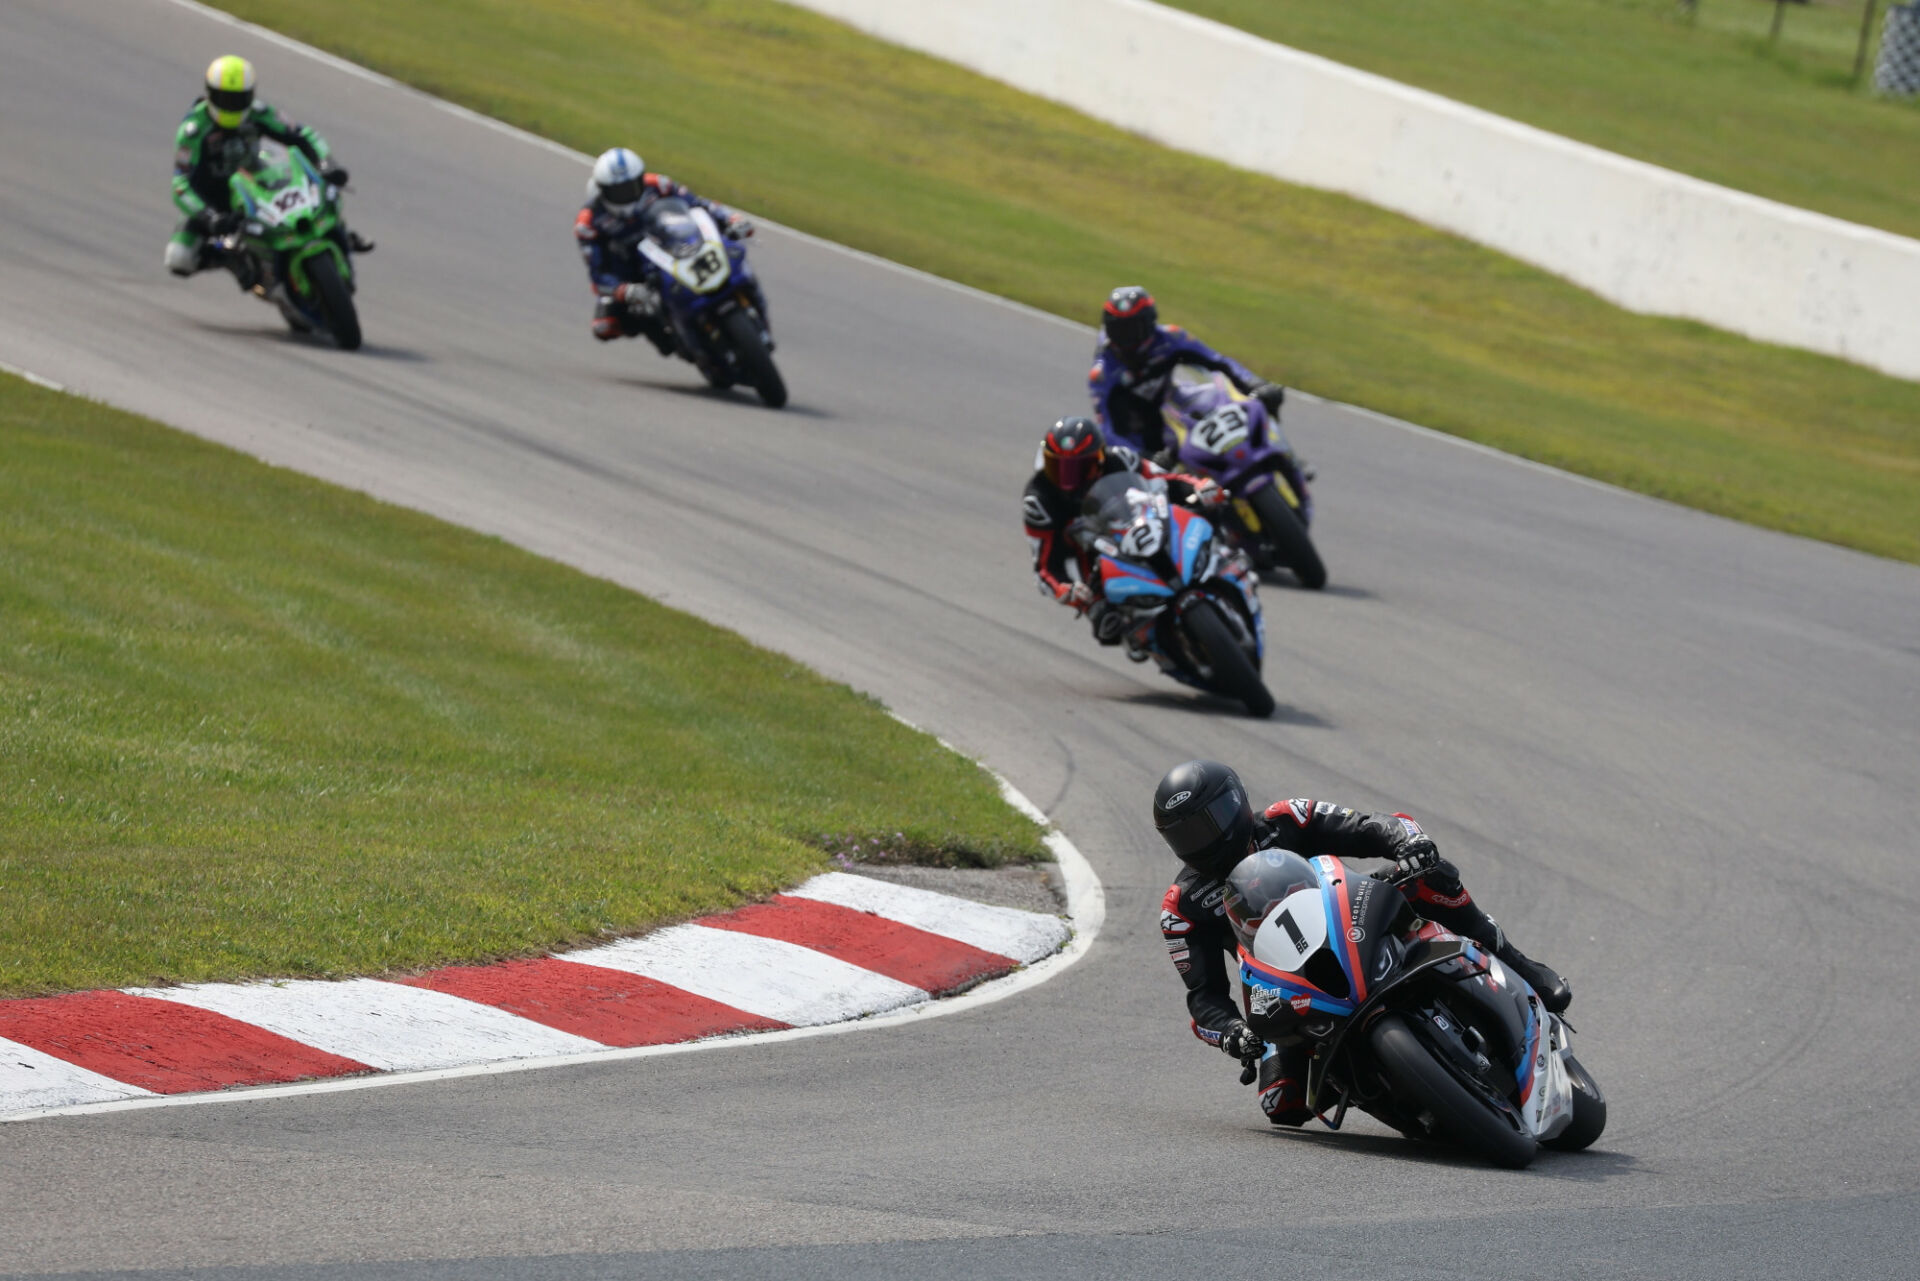 Ben Young (1) scored a perfect weekend at the CTMP tripleheader, winning all three GP Bikes Pro Superbike races over Sam Guerin (2) and Alex Dumas (23). Tomas Casas (18) finished race three in fourth ahead of Jordan Szoke (101). Photo by Rob O'Brien, courtesy CSBK.